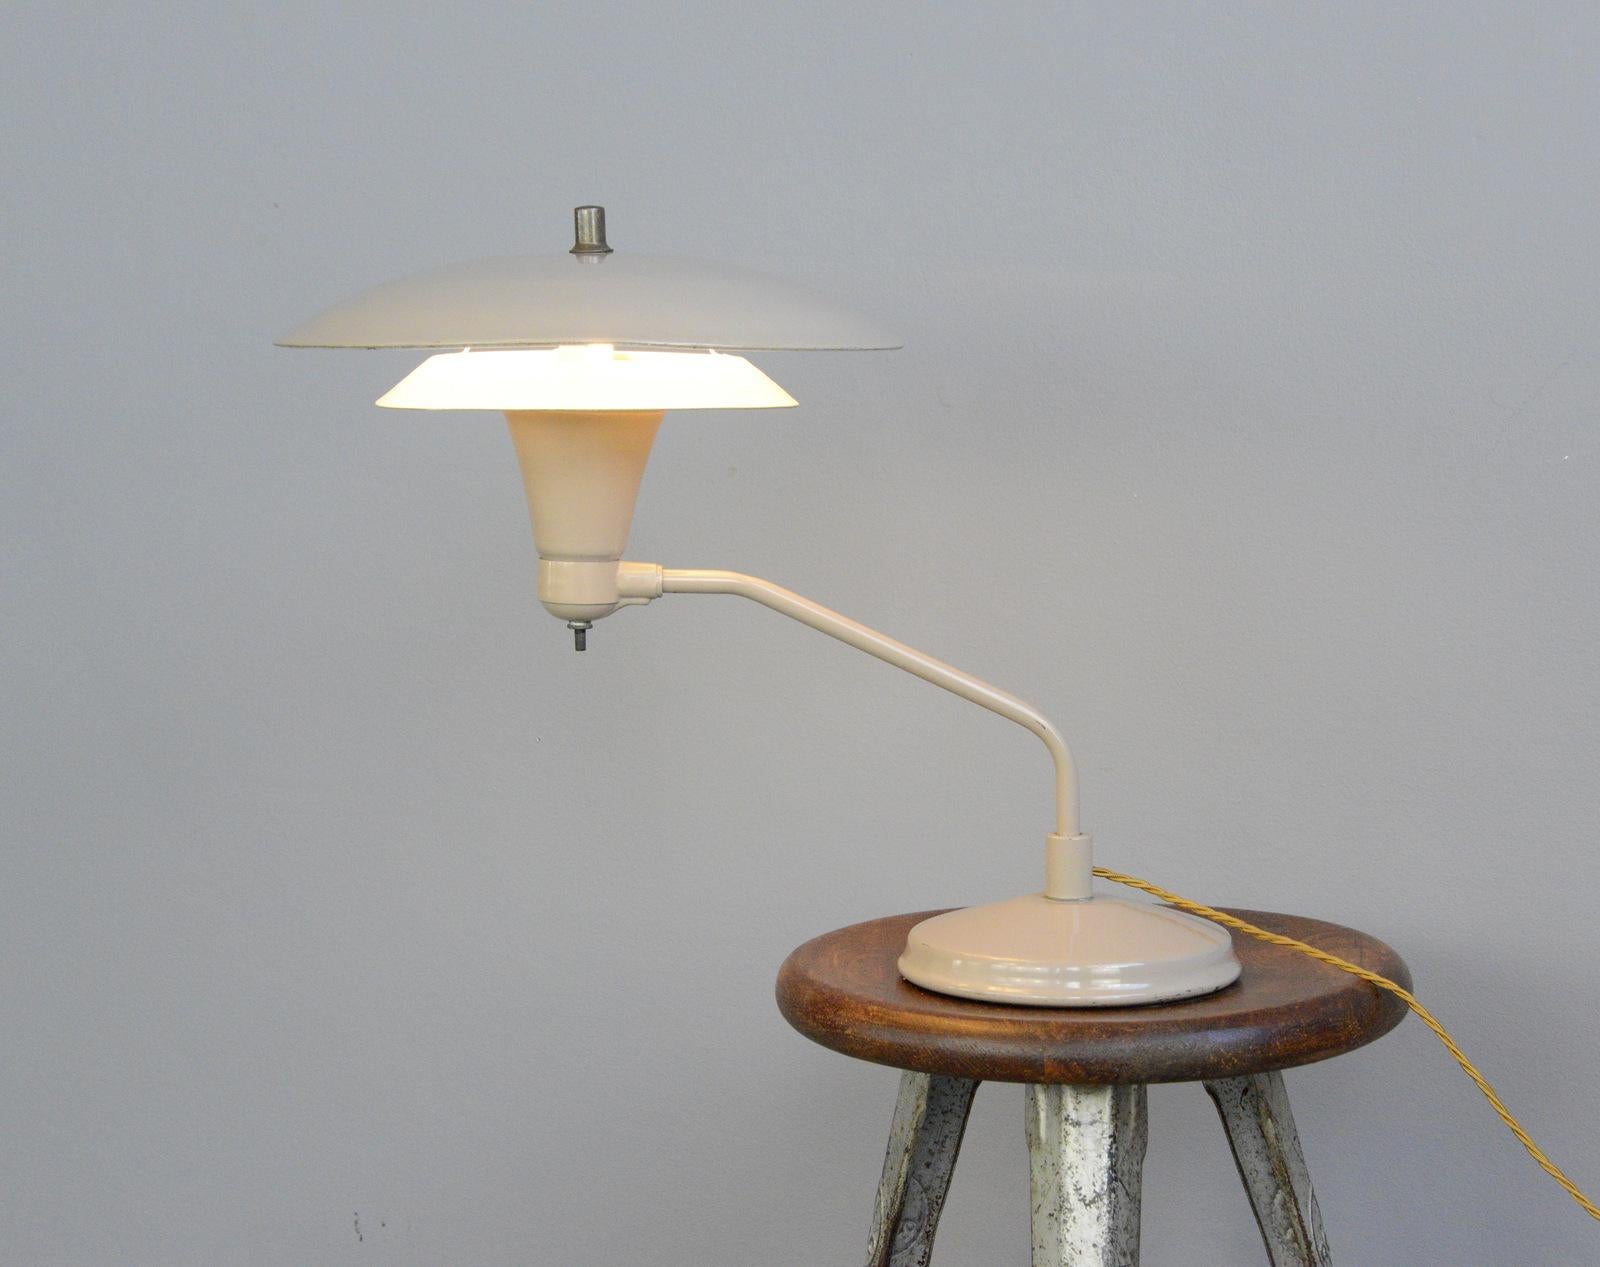 Mid-Century Modern Midcentury Desk Lamp by Art Speciality Chicago, circa 1950s